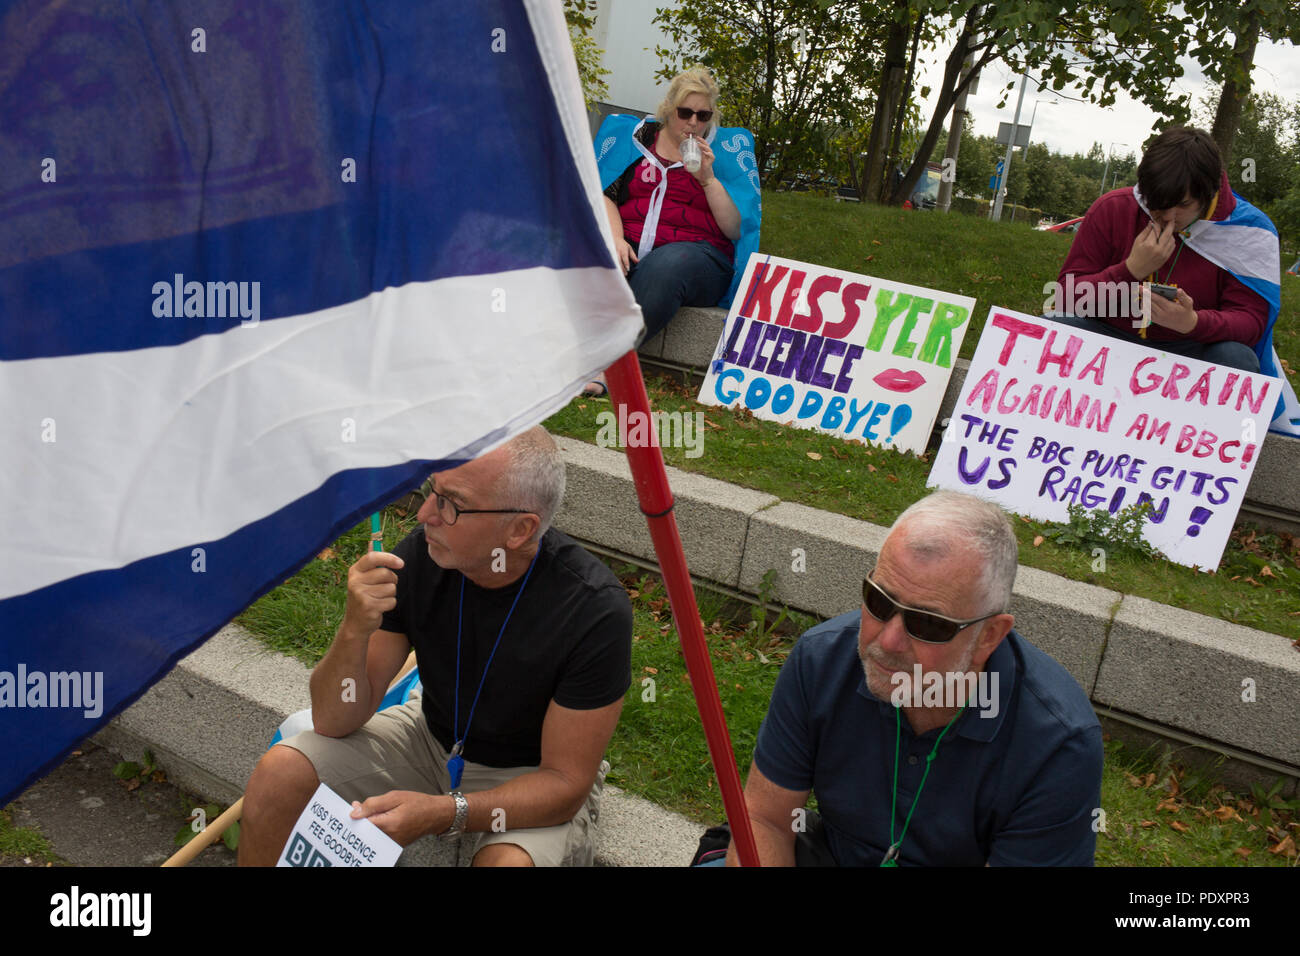 Glasgow, Scotland, on 11 August 2018. Pro-Scottish independence supporters protest against a perceived bias of the BBC against Scotland and the pro-Scottish indpendence movement. Approximately 300 people took part in the protest outside the BBC at Pacific Quay, in Glasgow, Scotland. Image credit: Jeremy Sutton-Hibbert/ Alamy News. Stock Photo